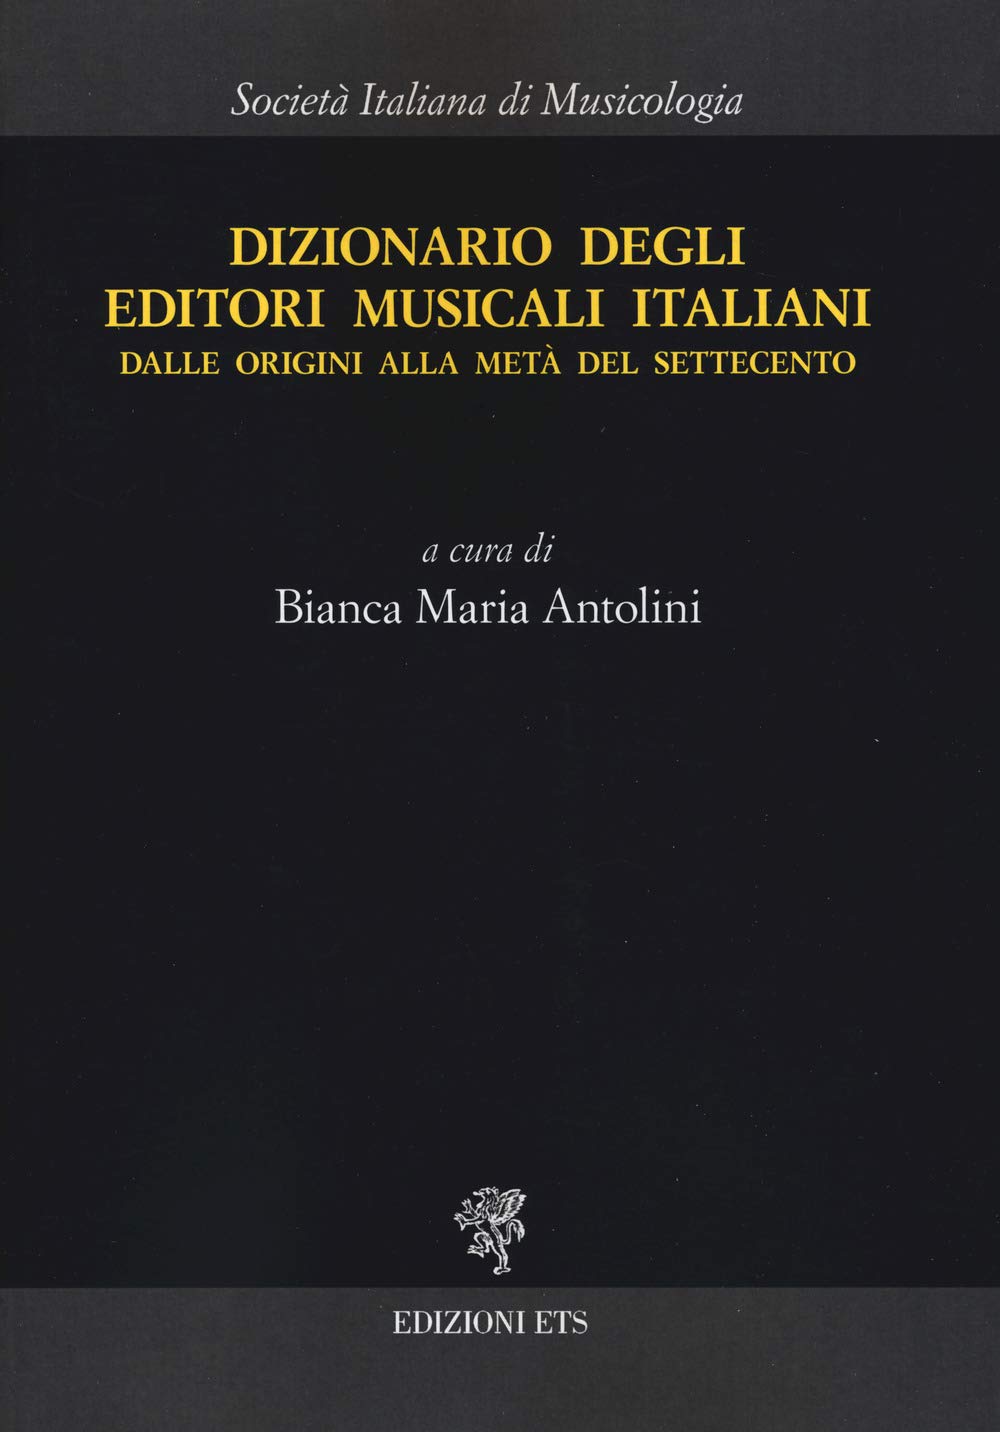 Cover of an Italian dictionary of early music printing Dizionario